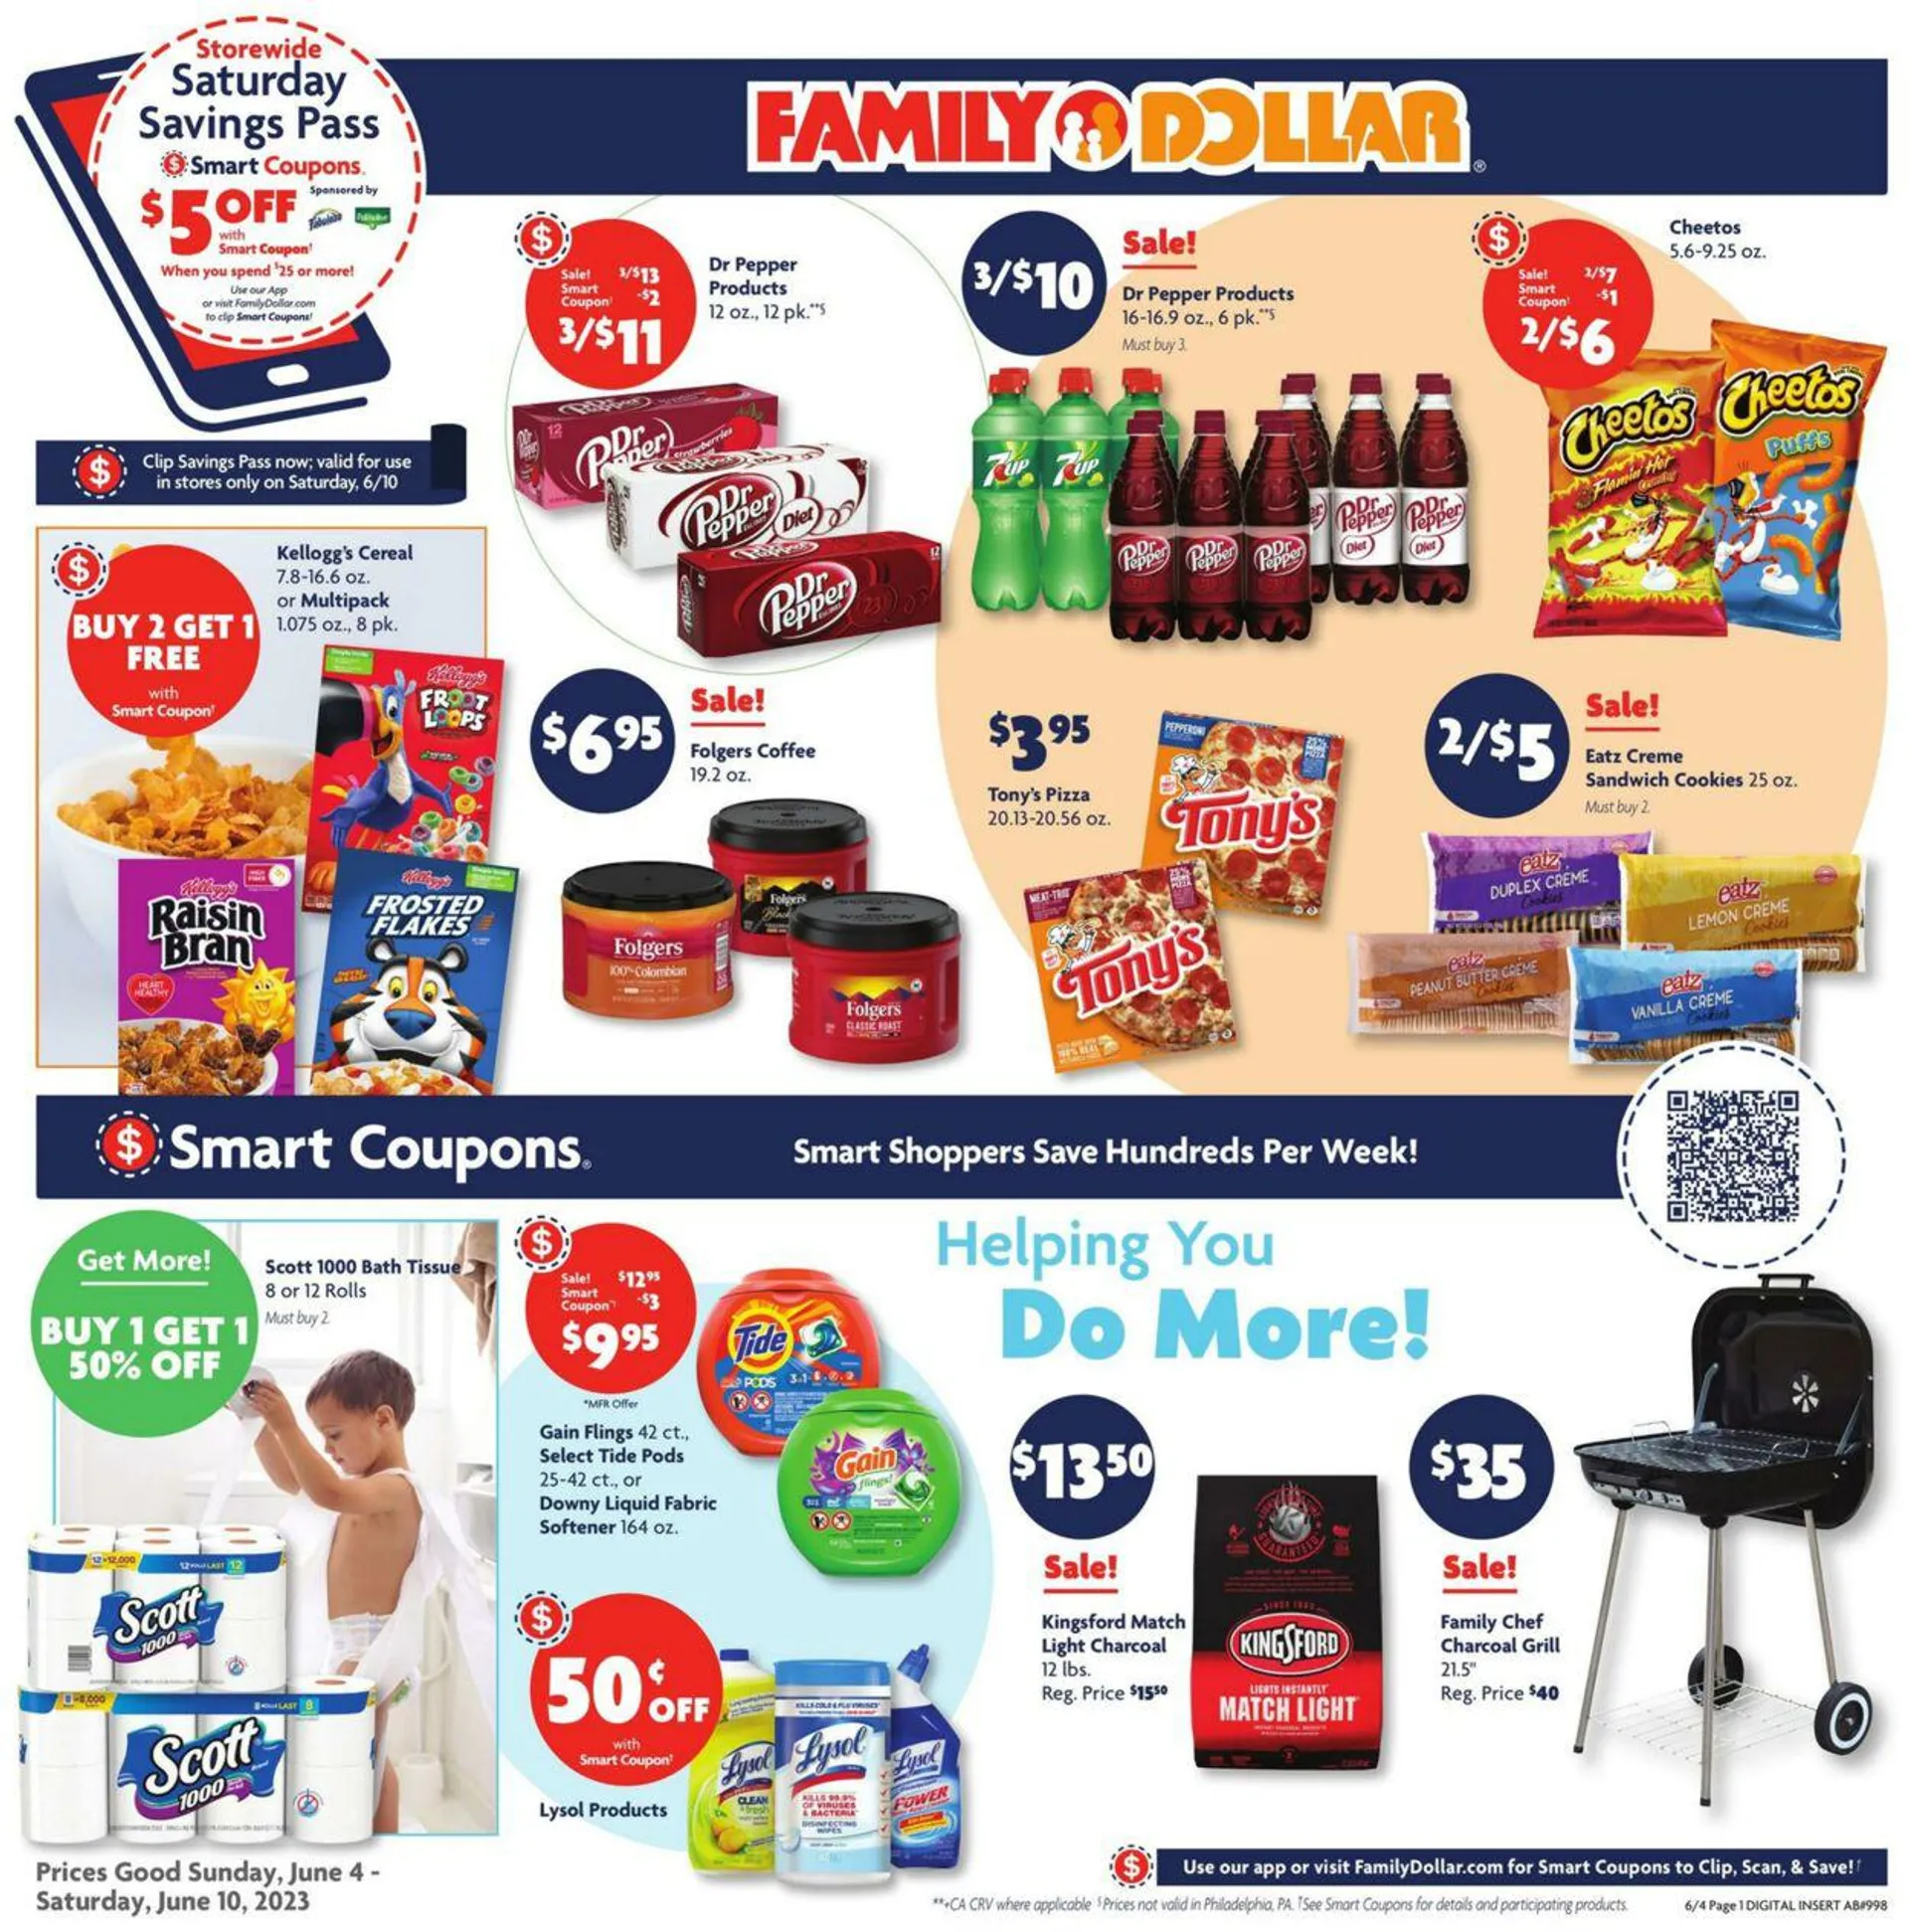 Family Dollar Current weekly ad - 1